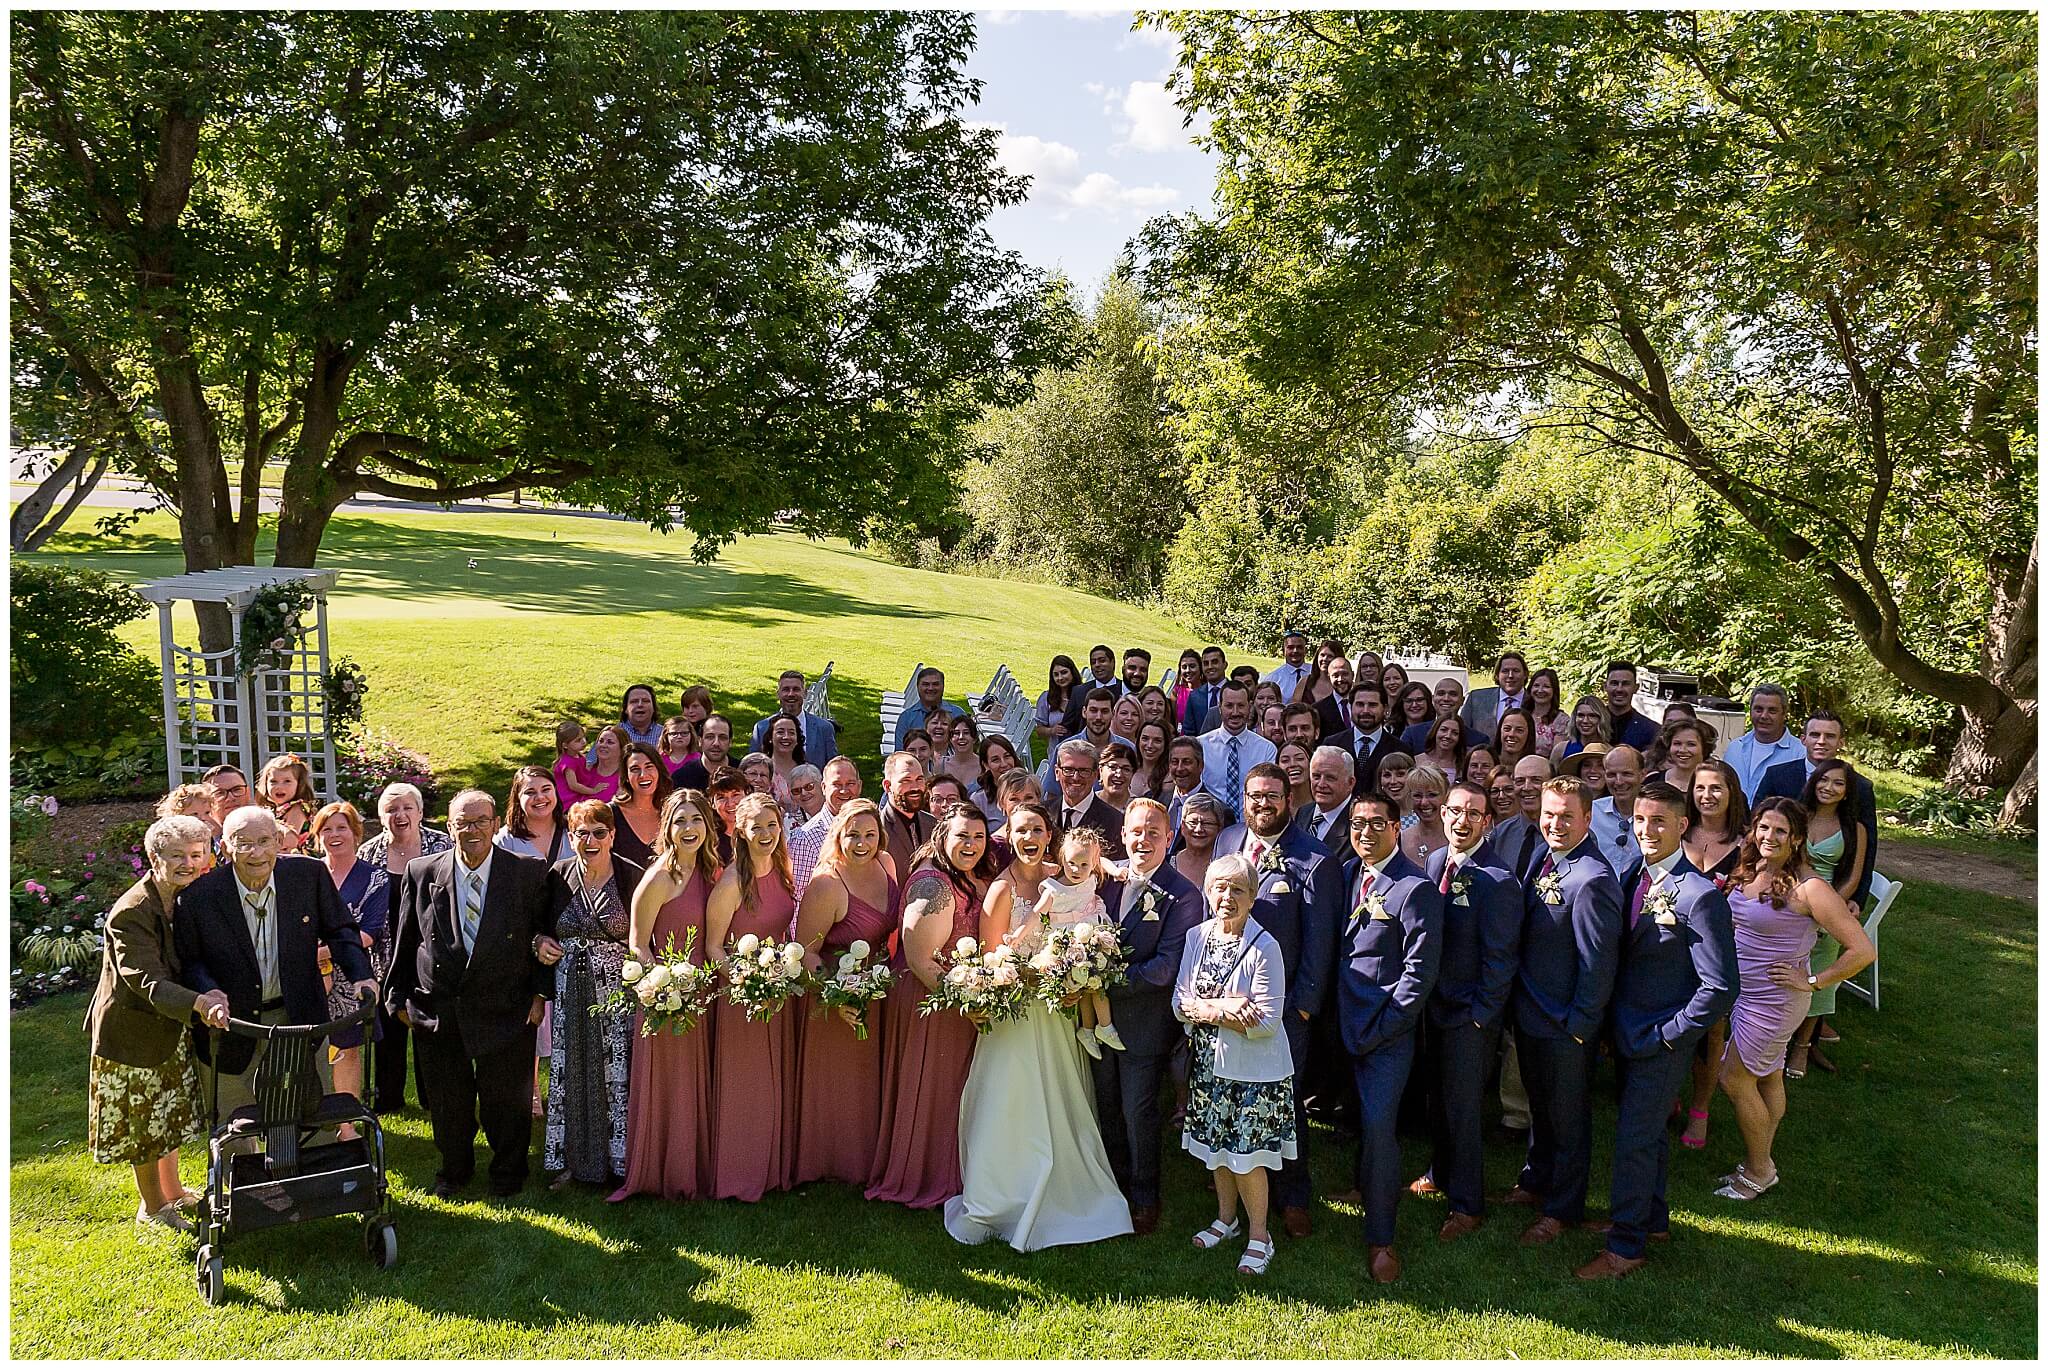 large group photo of a bride and groom and all their guests. Taken outdoors at The Marshes wedding venue